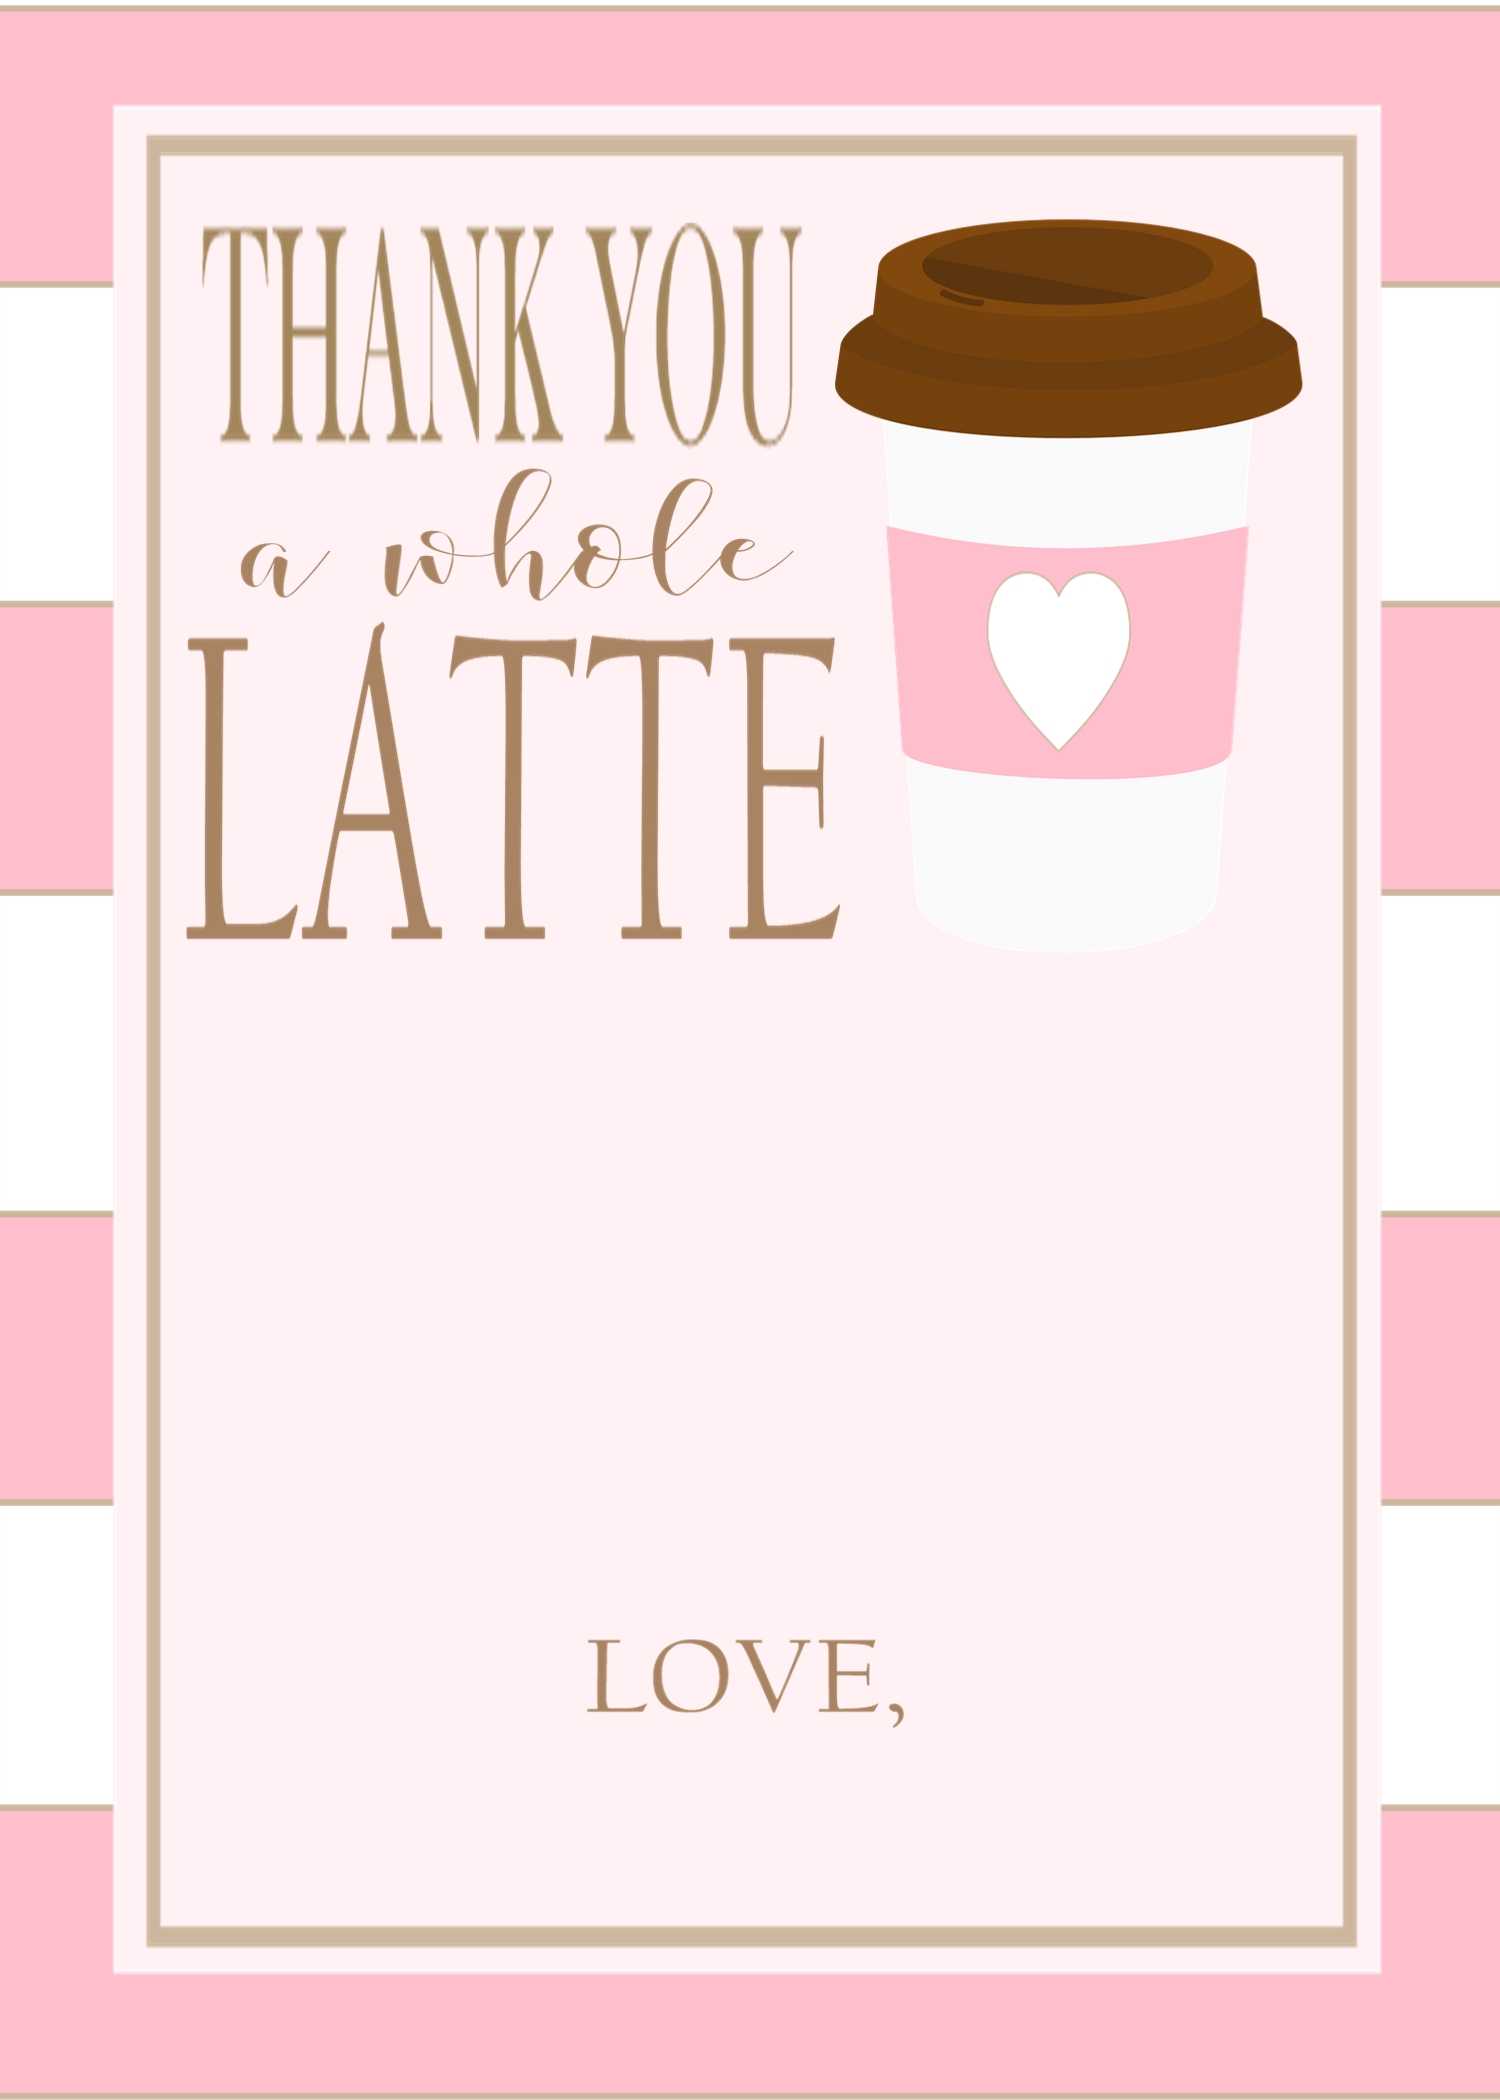 028 Latte Template Ideas Free Gift Card Breathtaking Pdf For Thanks A Latte Card Template